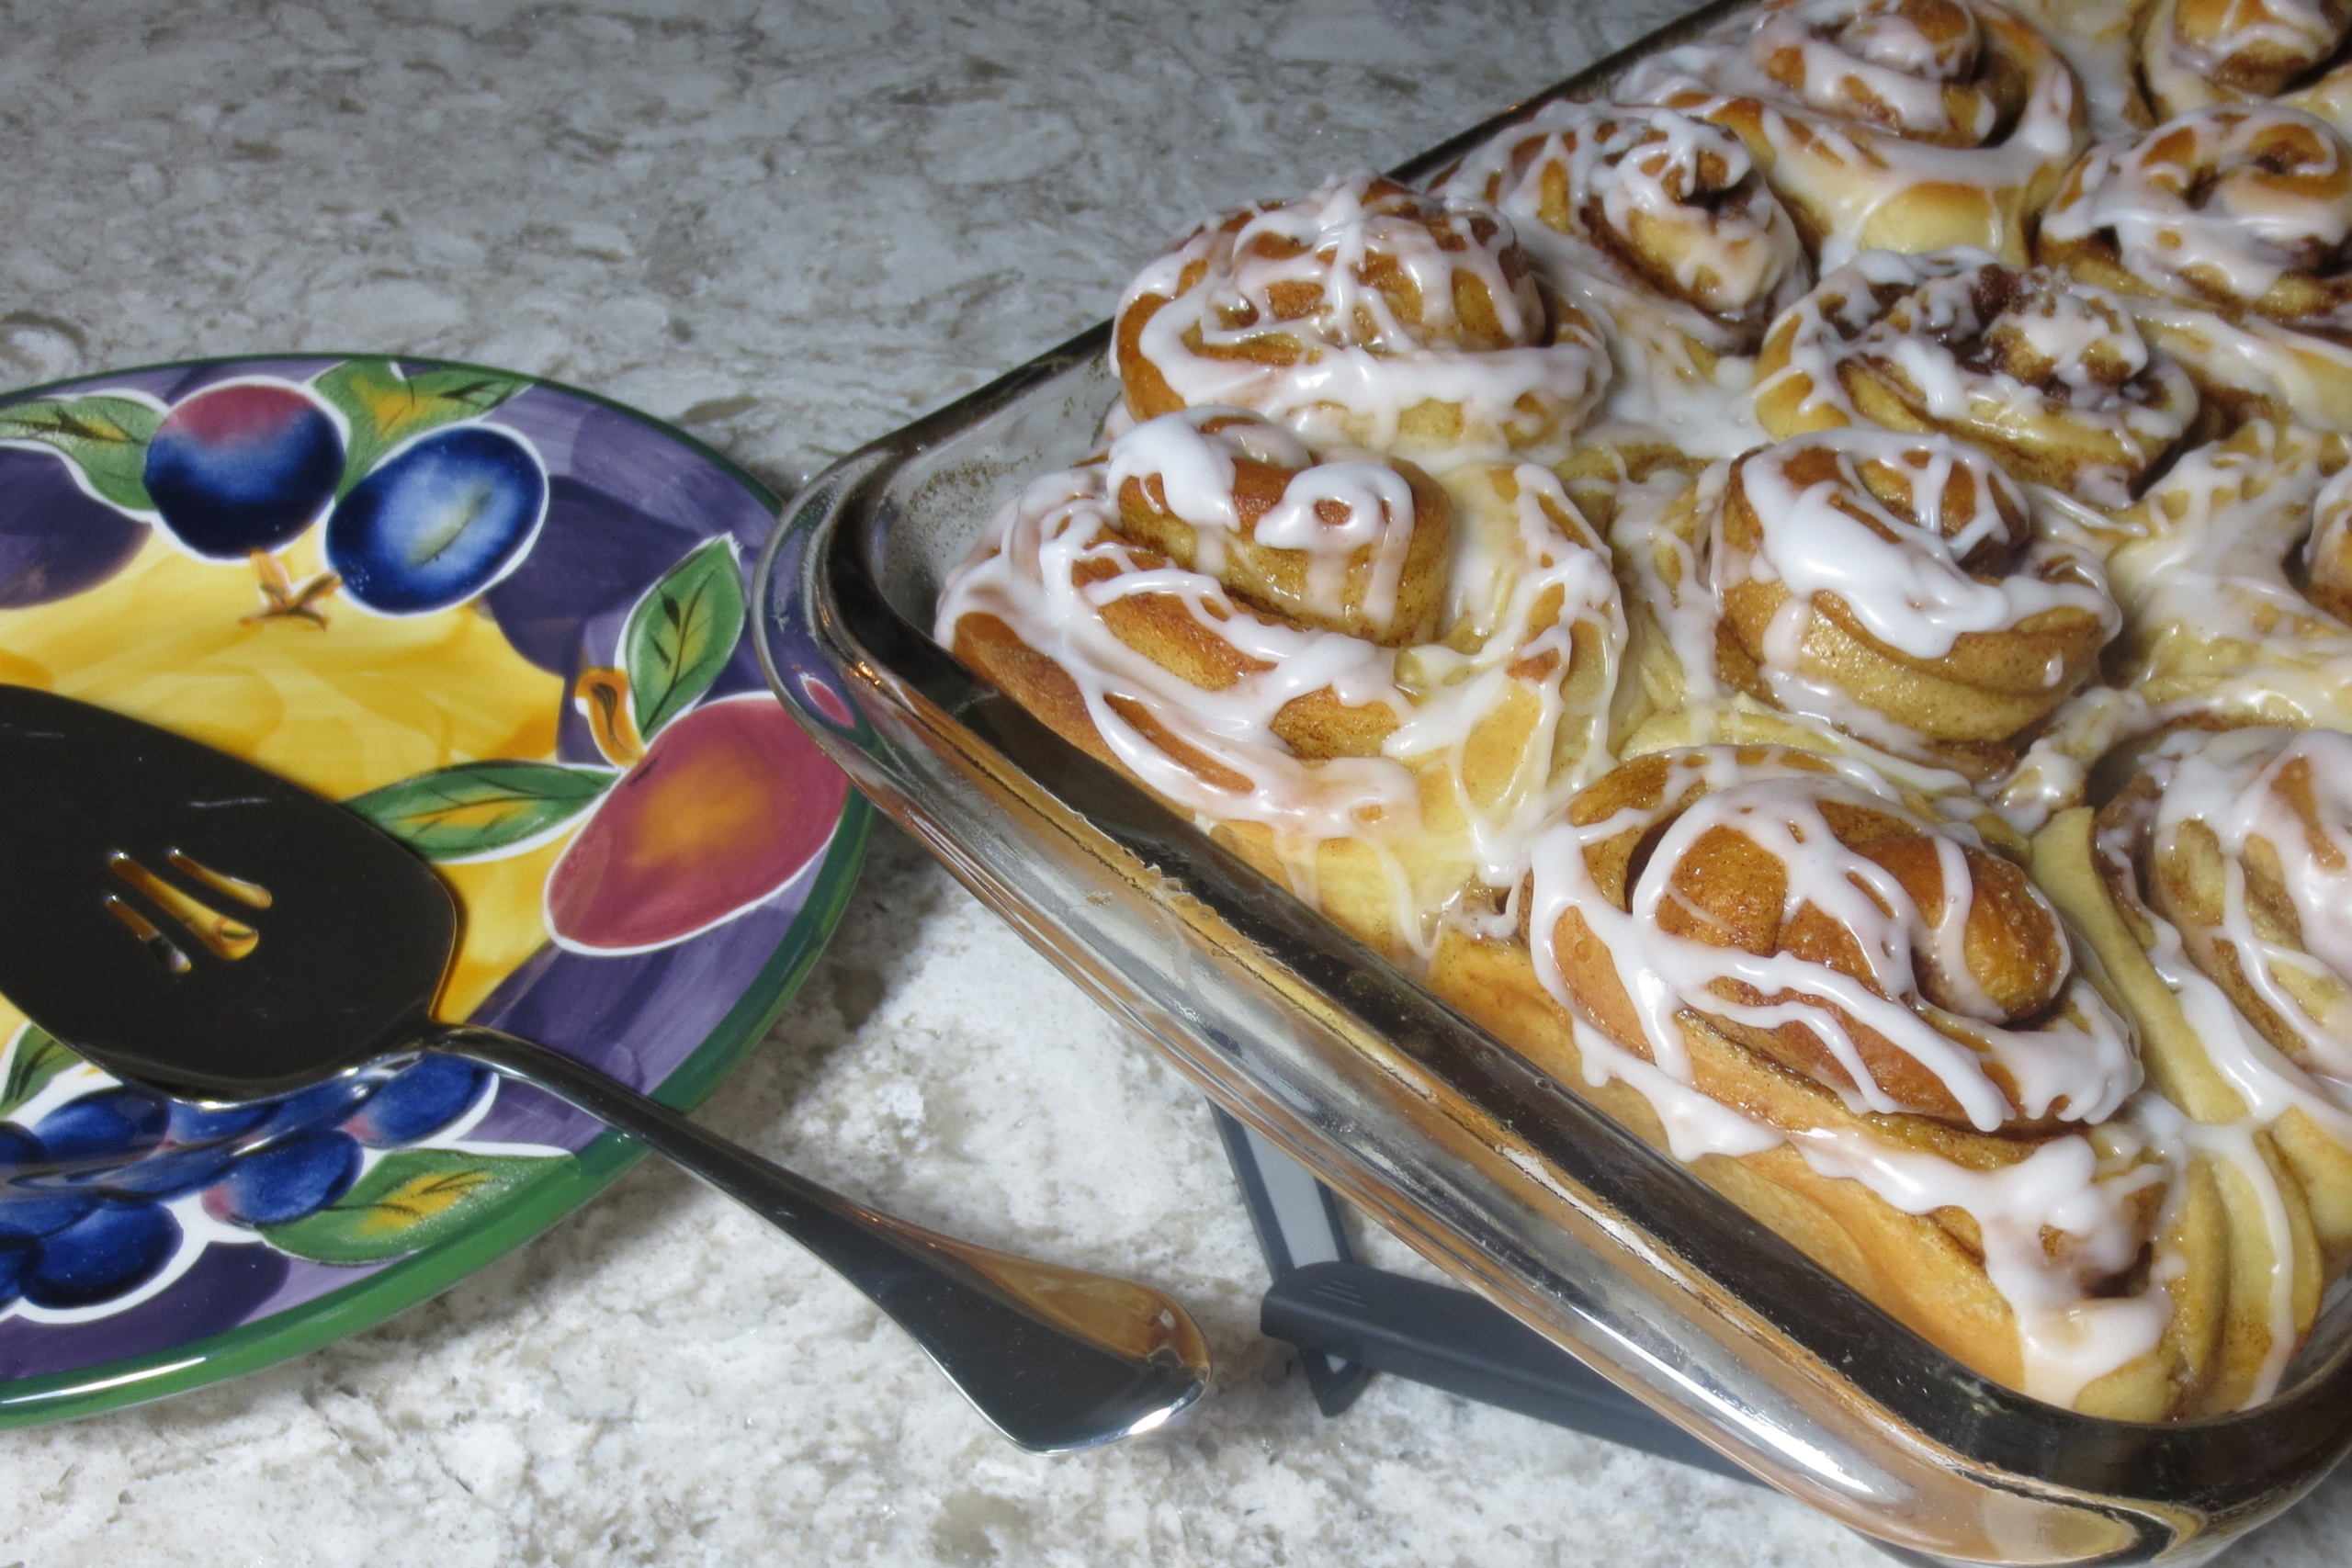 Mix these up the night before and then enjoy soft, pillowy, melt in your mouth cinnamon rolls straight out of the oven for breakfast.